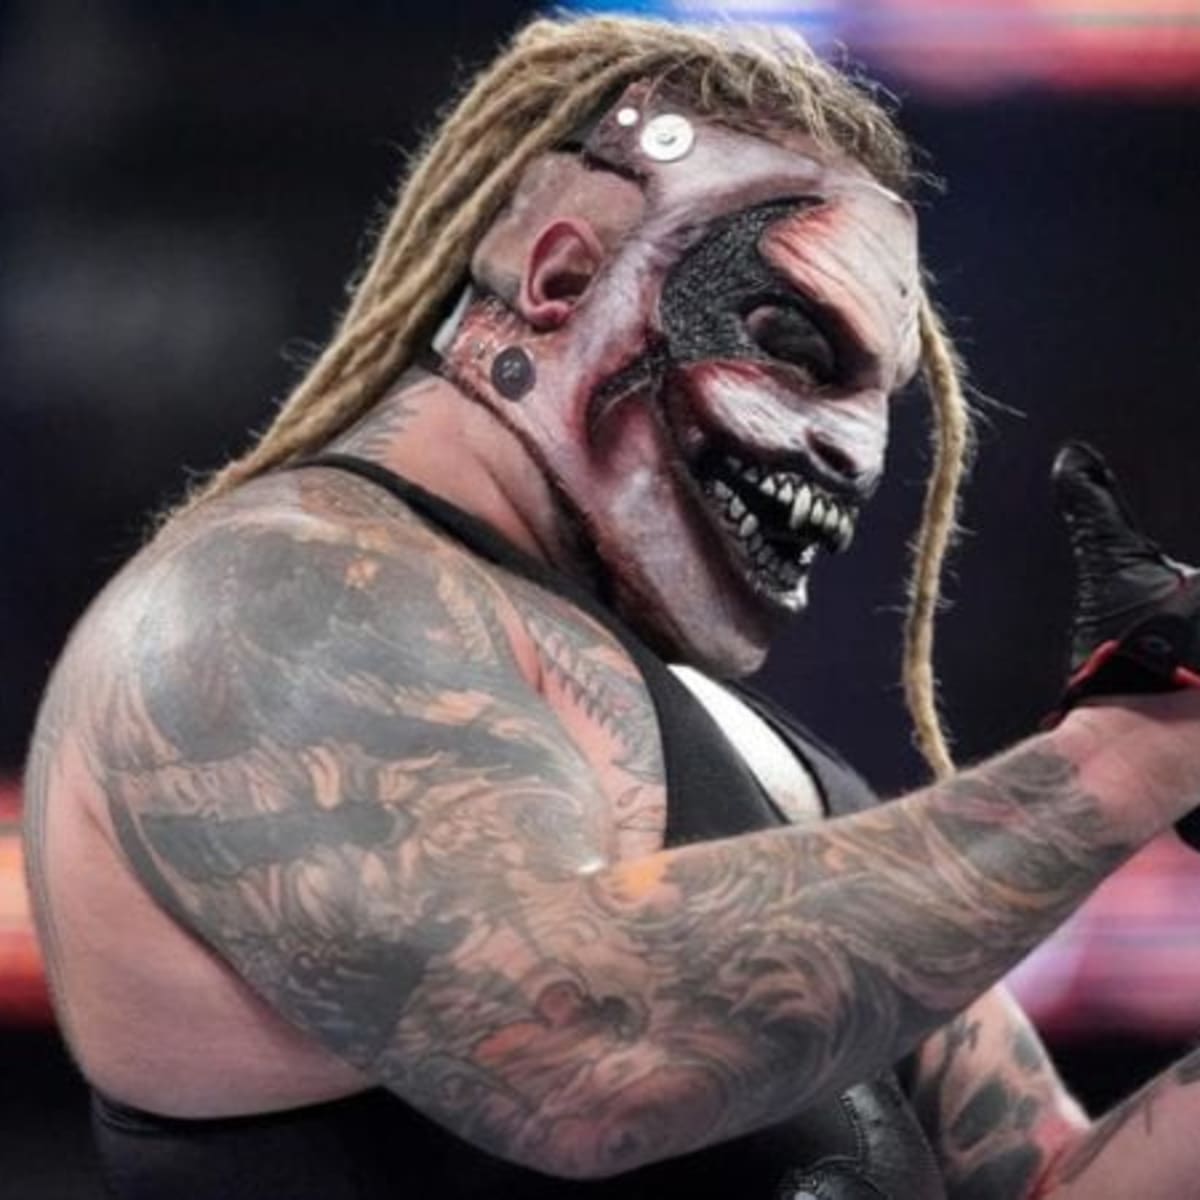 Here is why WWE pulled The Fiend Bray Wyatt's full entrance from